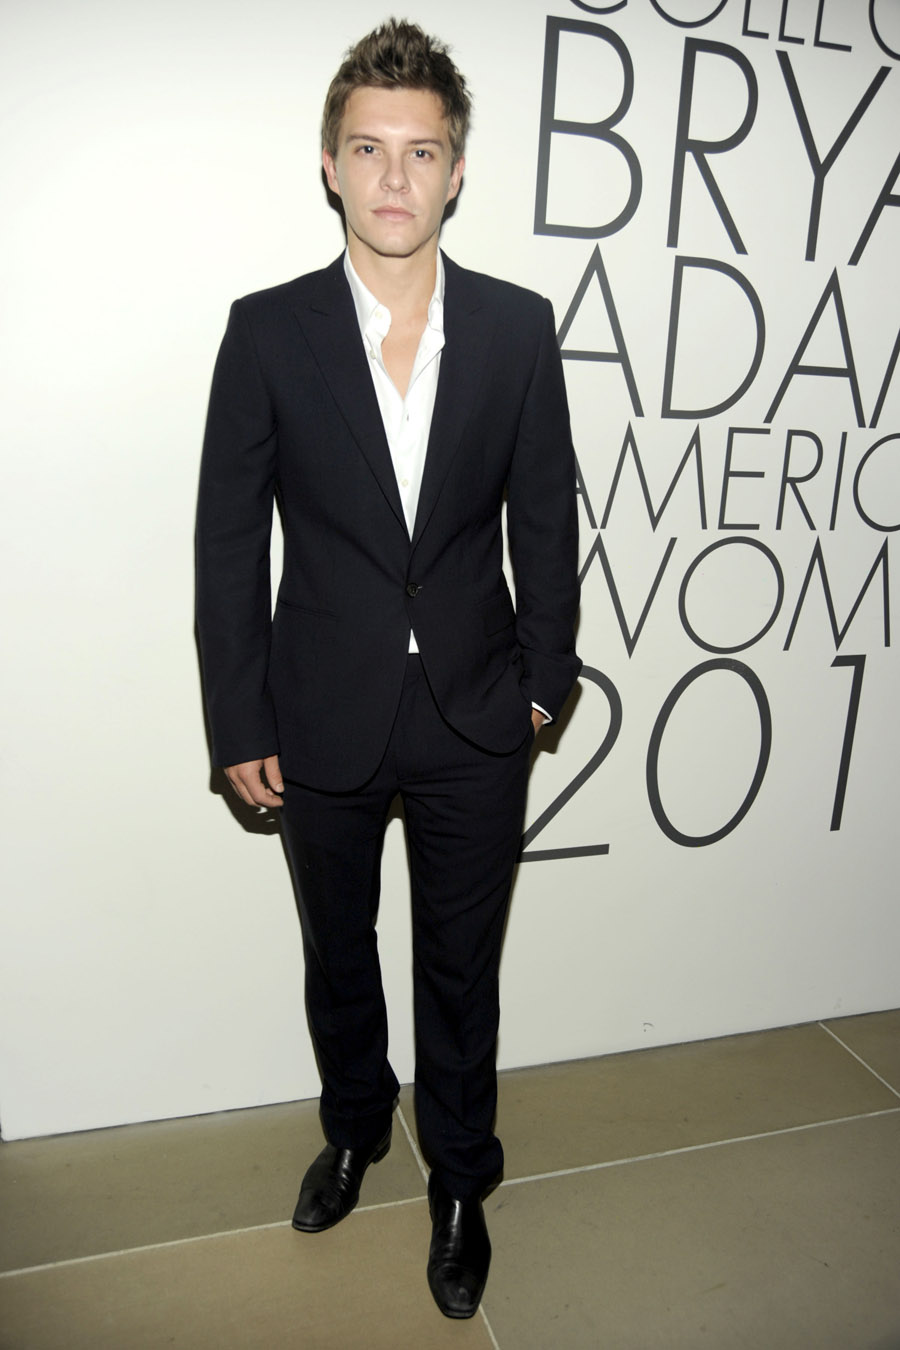 At Calvin Klein Madison Ave: Bryan Adams Drew Crowds During Fashion’s Night Out